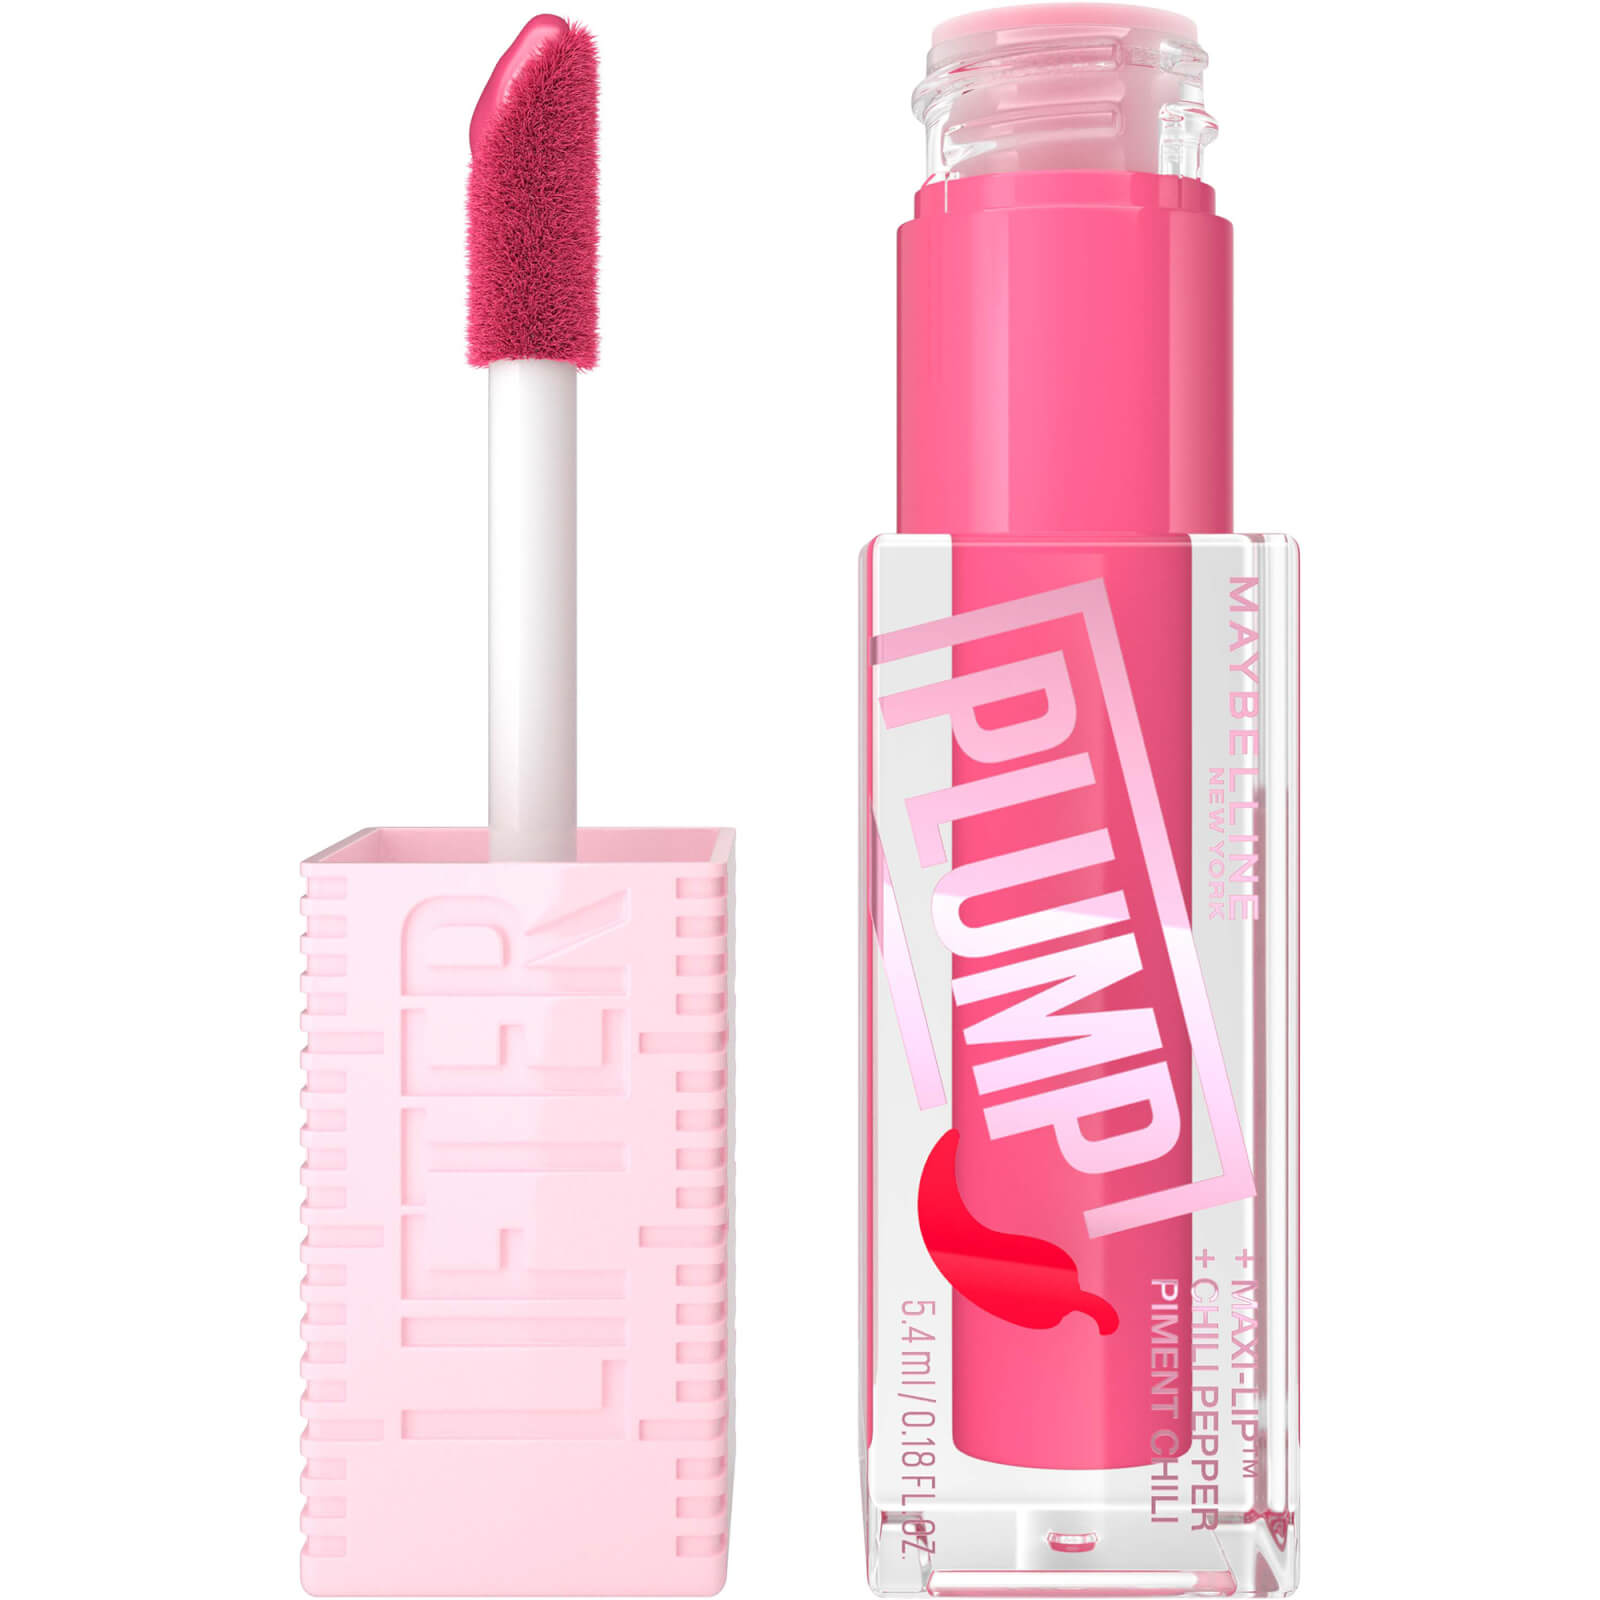 Image of Maybelline Lifter Gloss Plumping Lip Gloss Lasting Hydration Formula With Hyaluronic Acid and Chilli Pepper (Various Shades) - Pink Sting